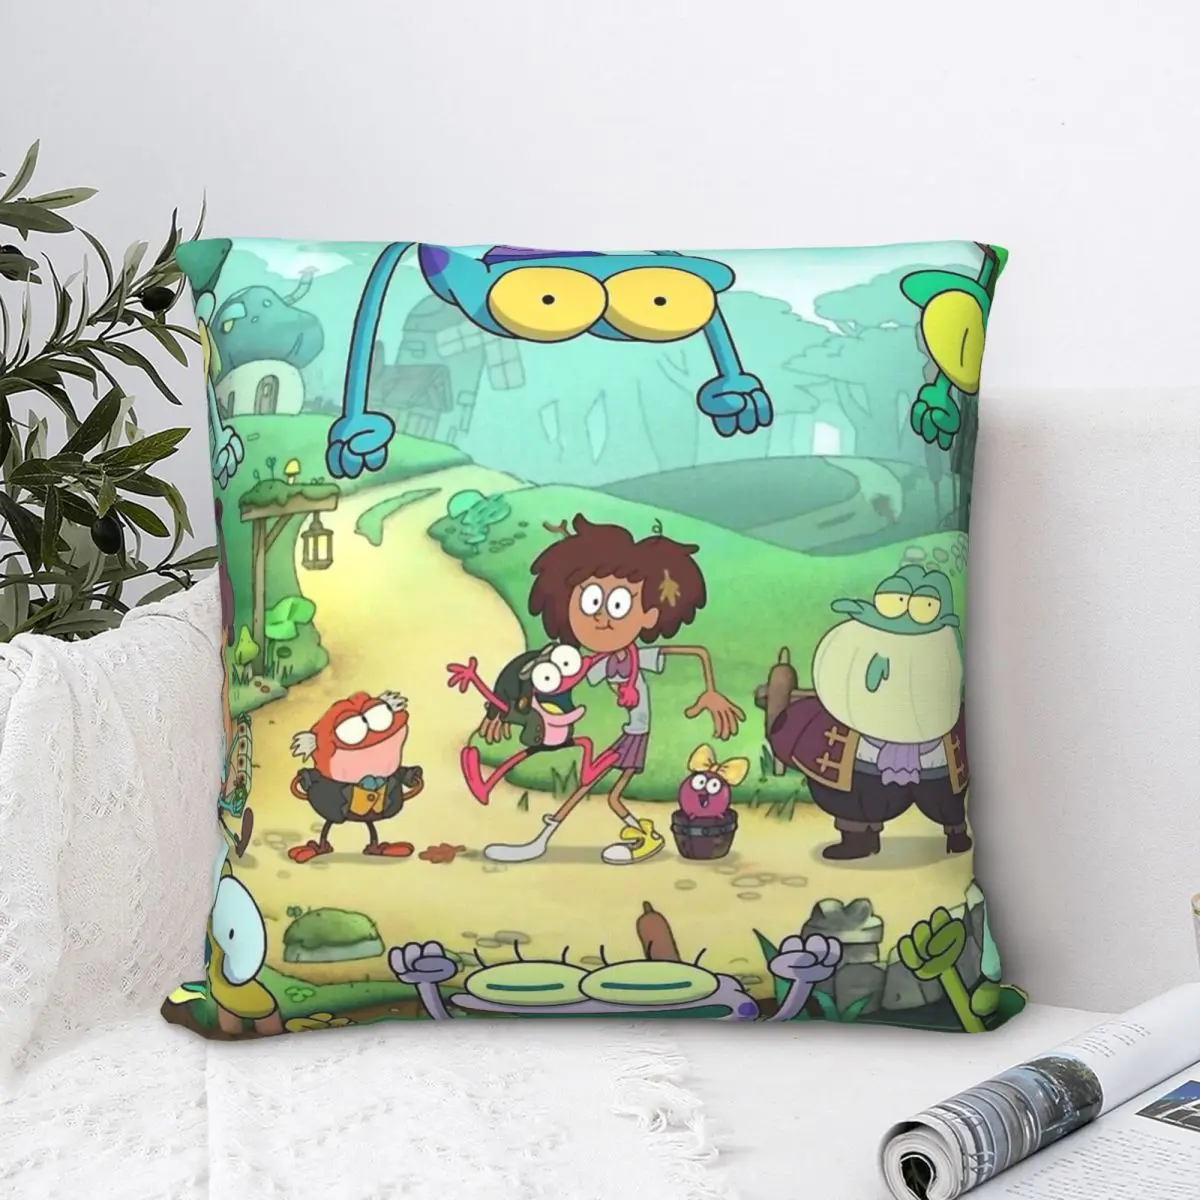 

Frog World Polyester Cushion Cover The Owl House x Amphibia Bedroom Chair Decorative Reusable Throw Pillowcase